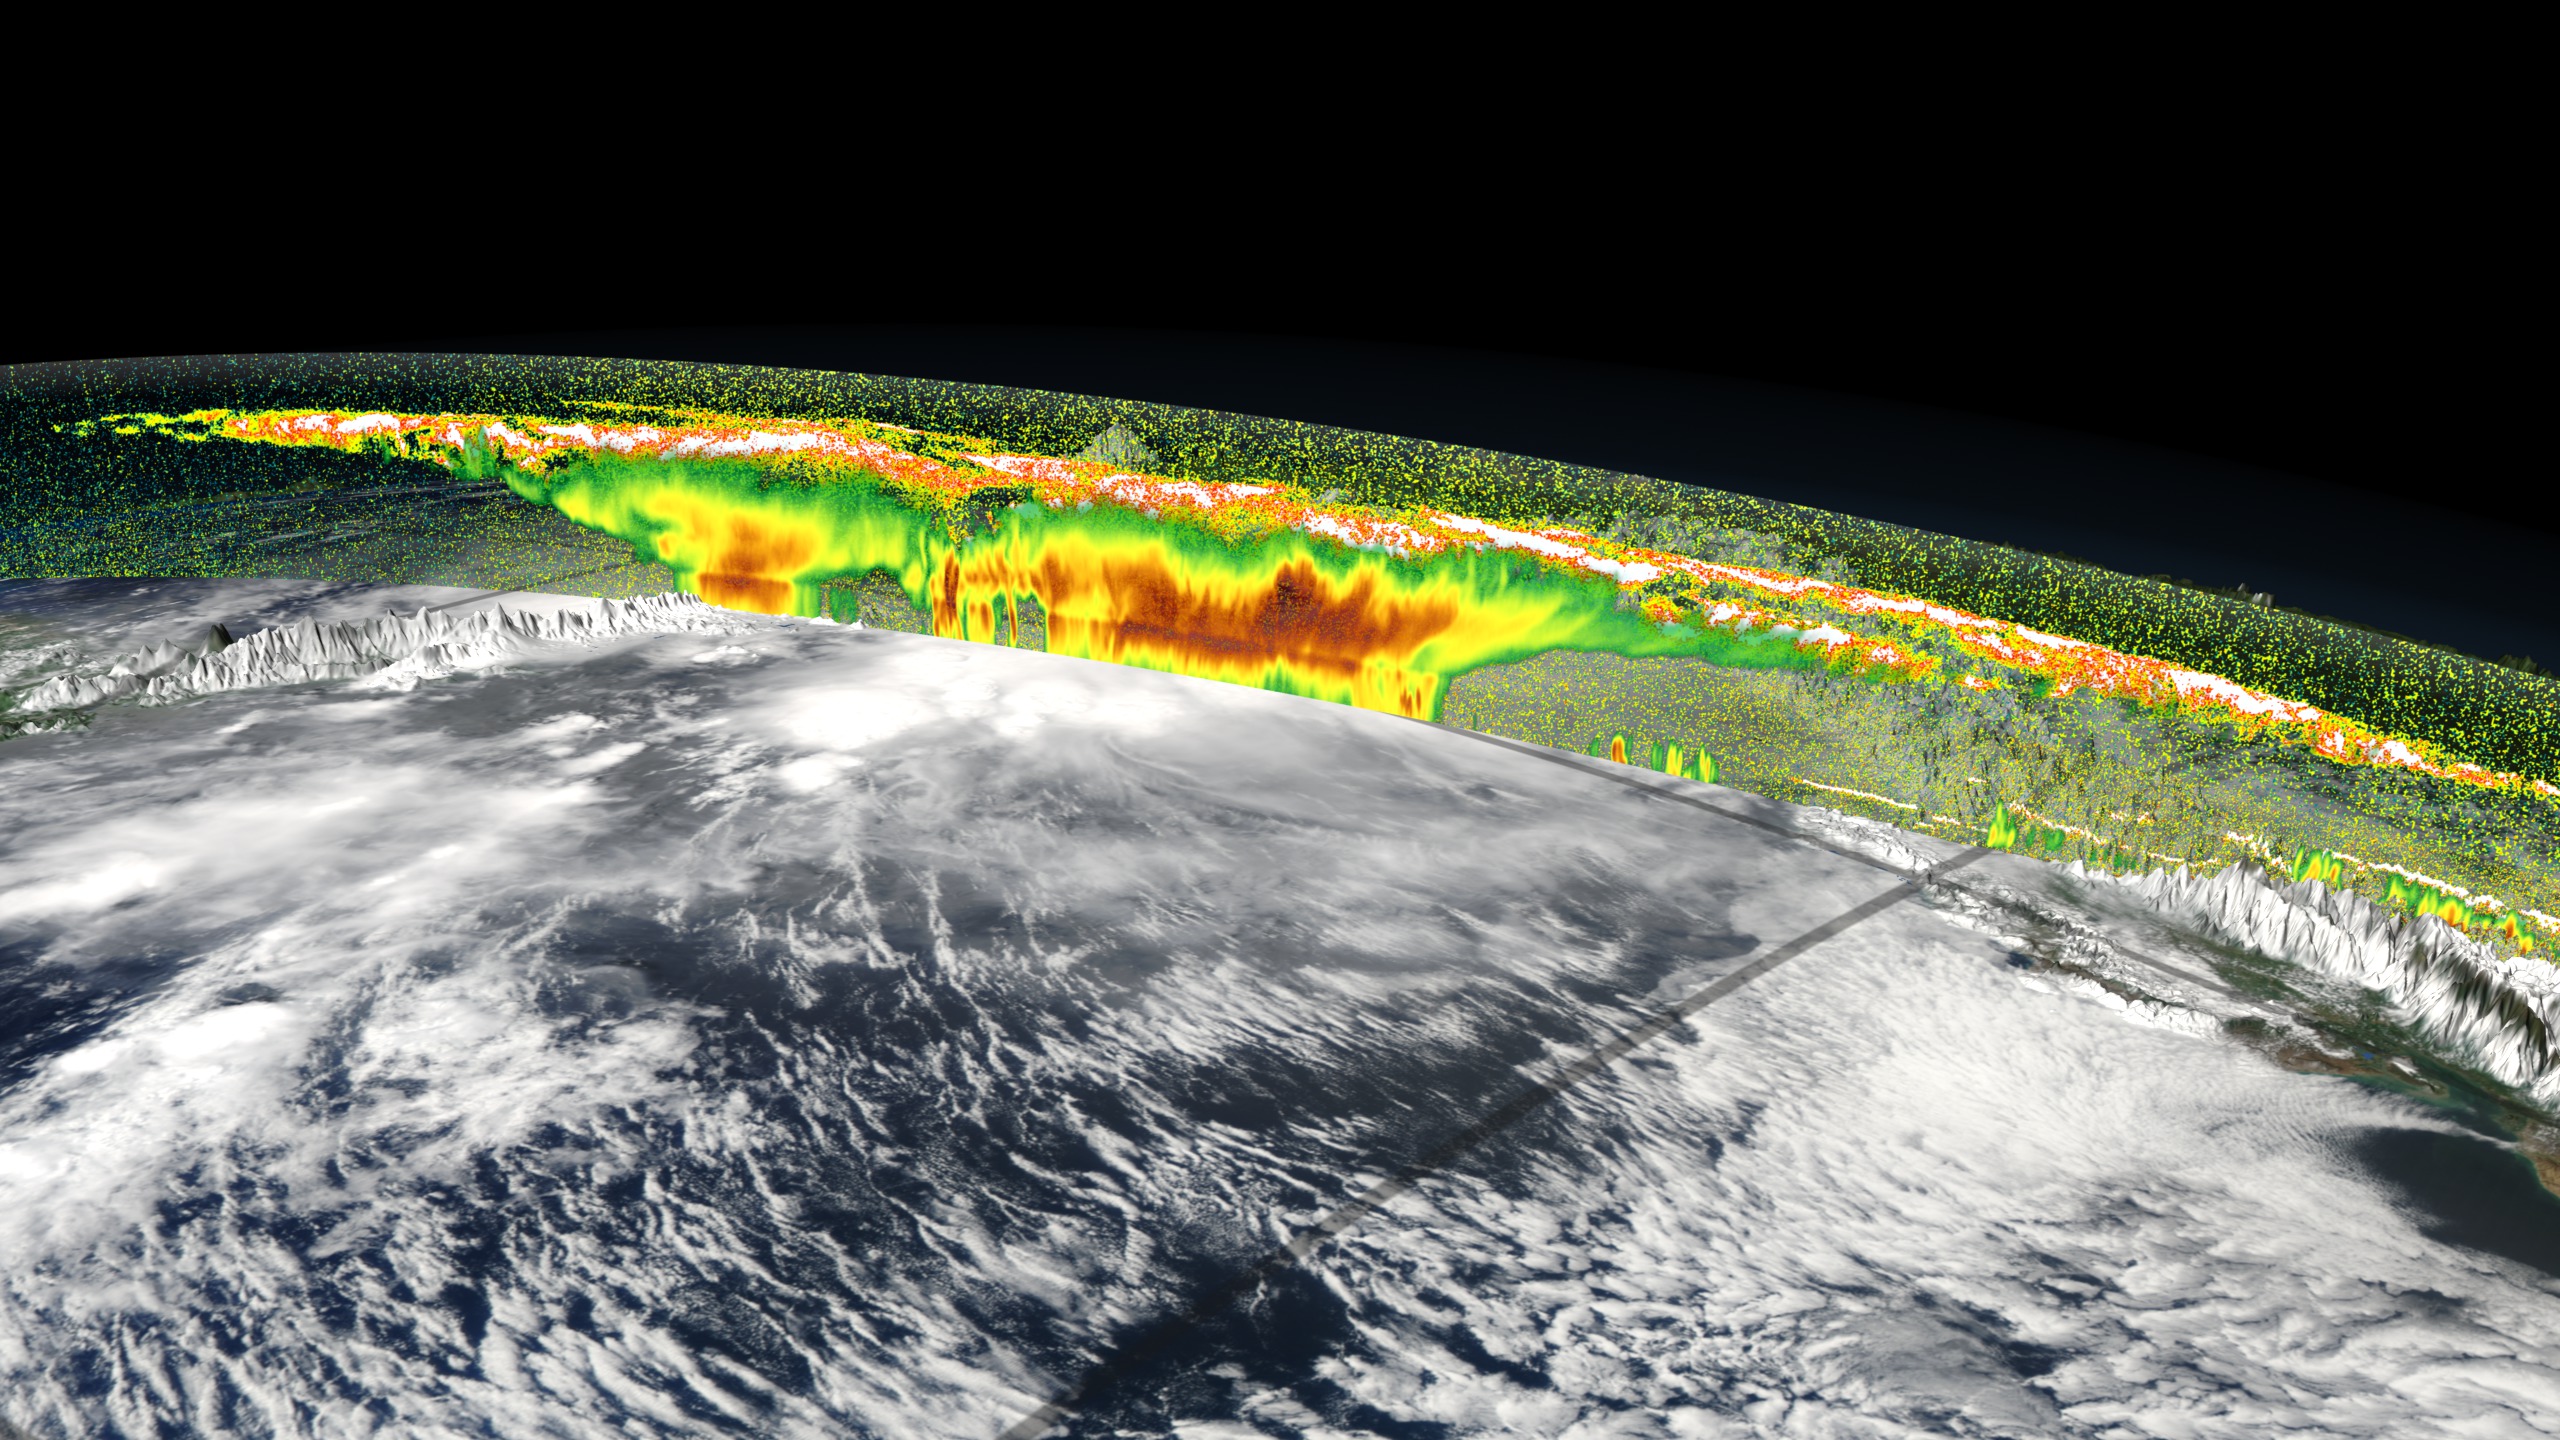 Both CloudSat and CALIPSO detect attributes of clouds on slices through the atmosphere.  Here both are shown over an image of MODIS reflectance which is mapped onto the terrain.